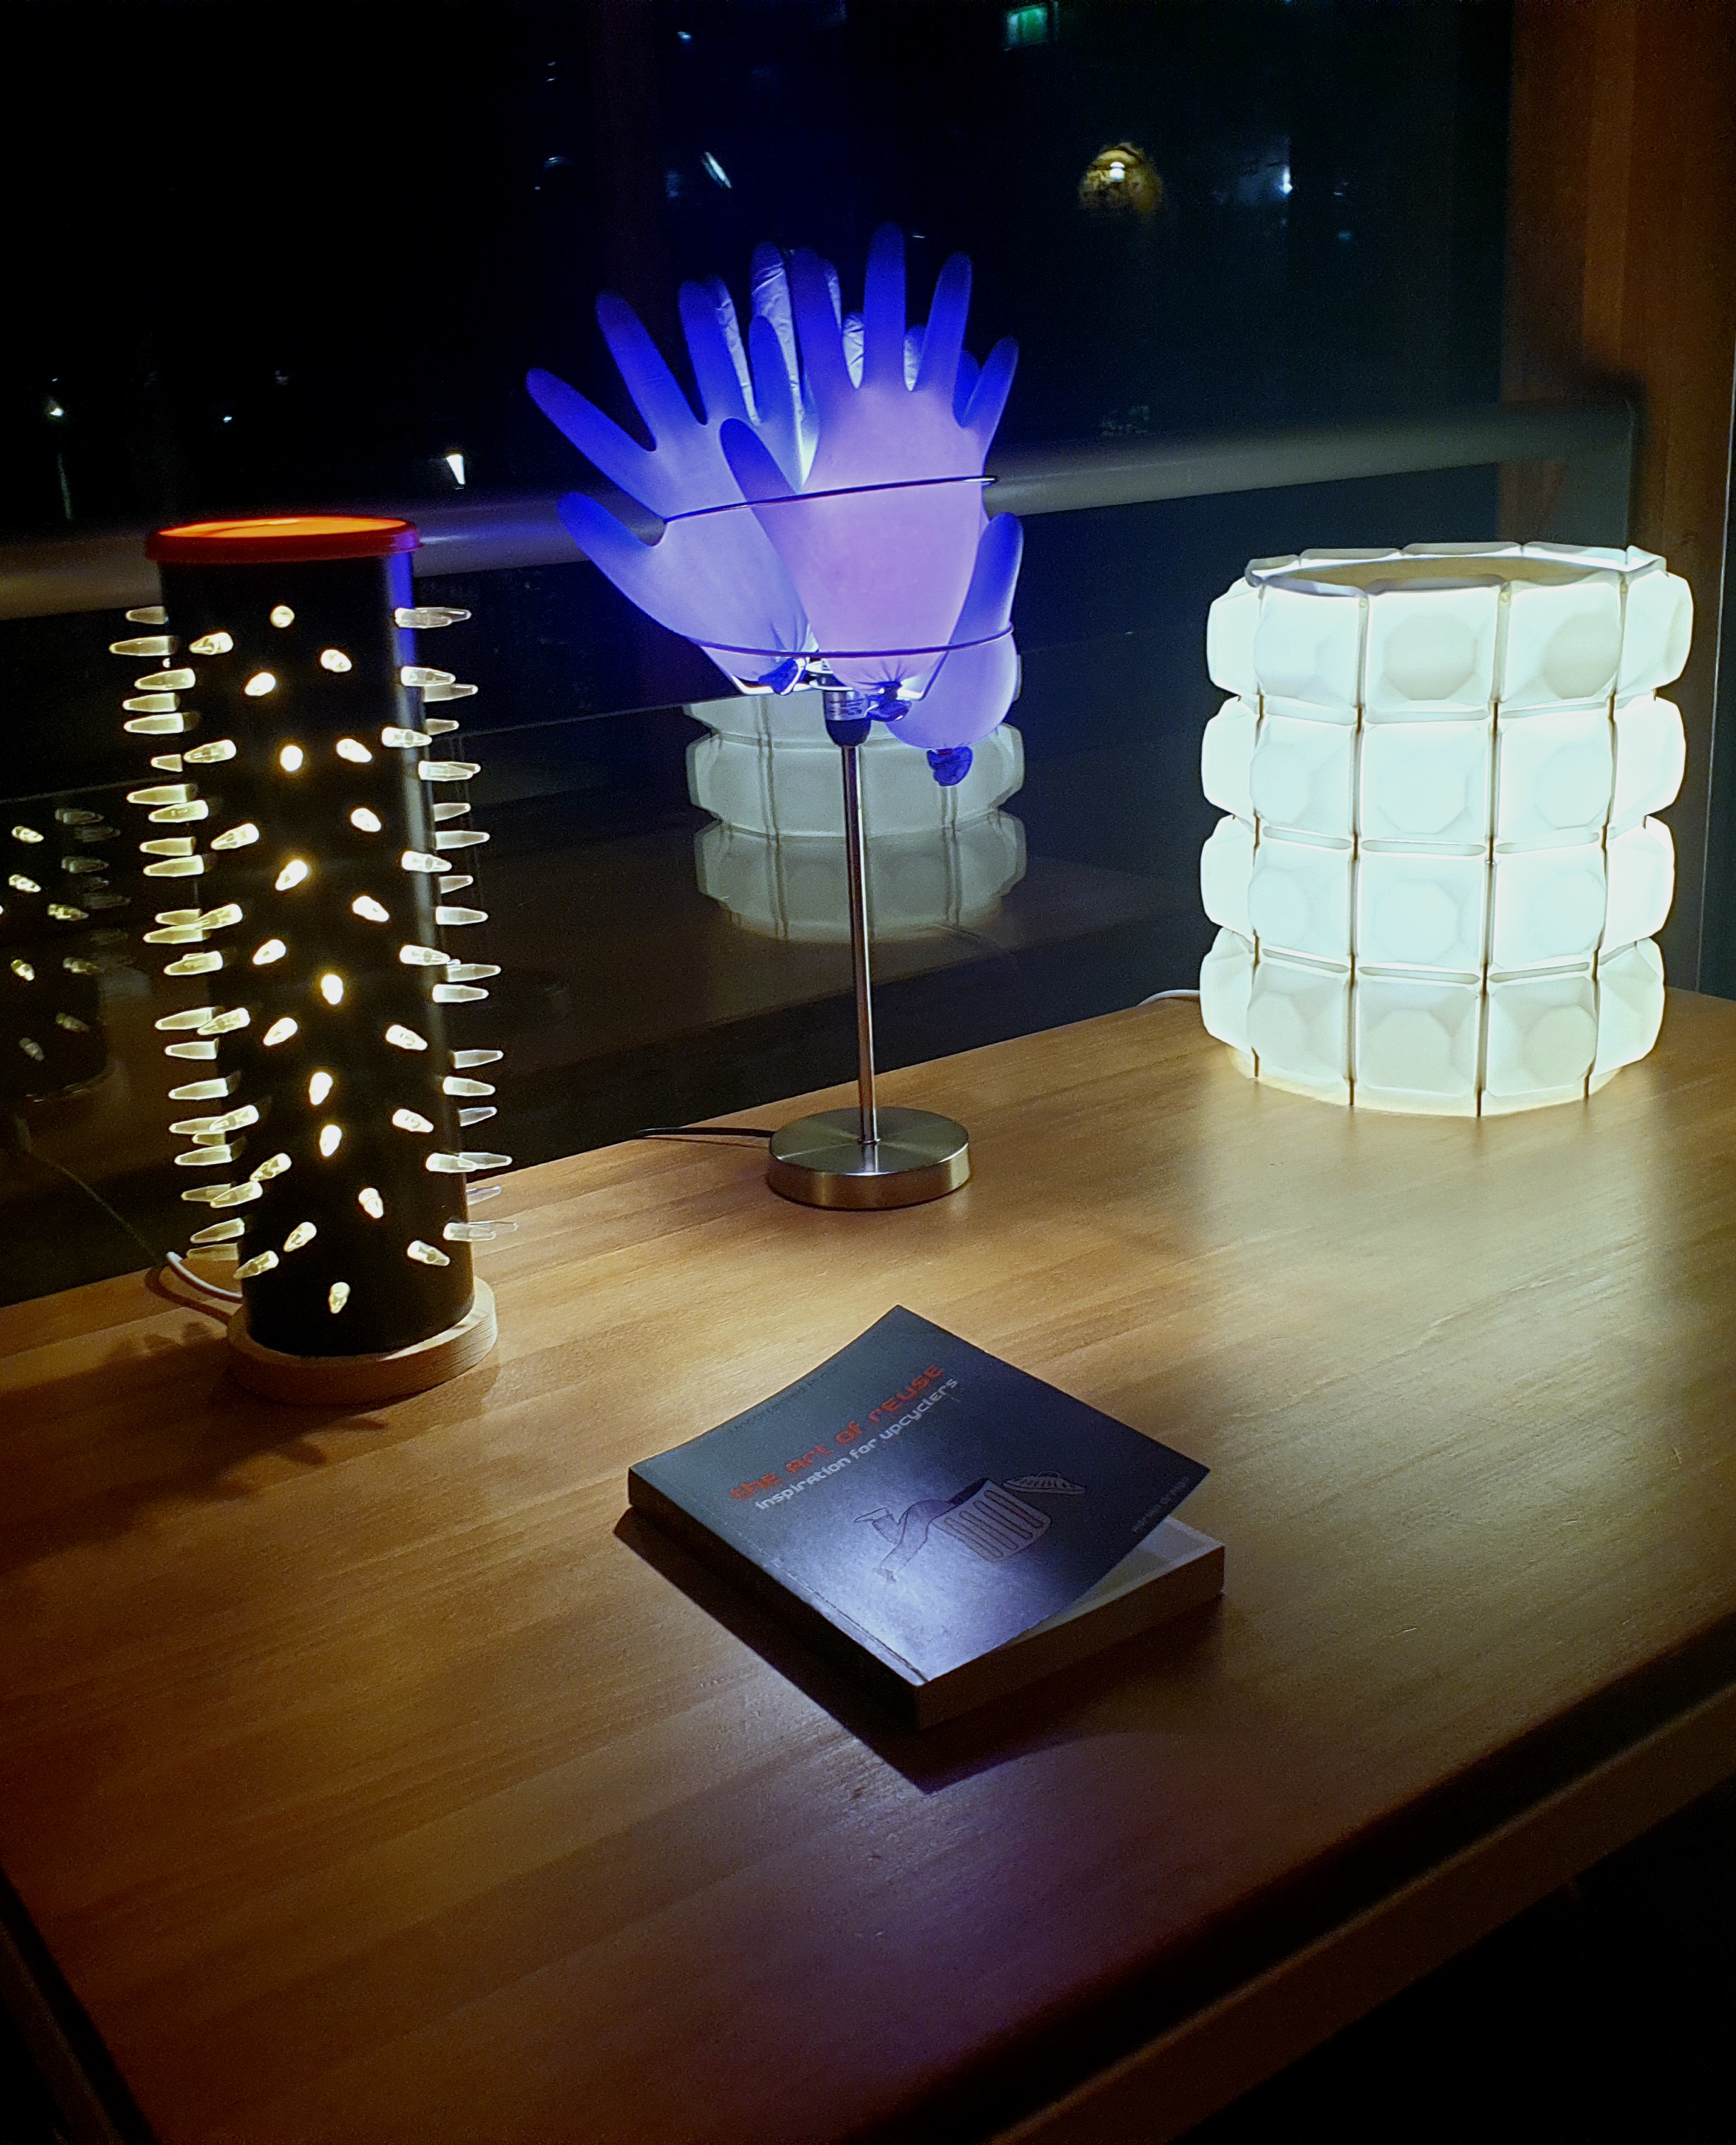 Inflated purple rubber gloves glow, on a stand, alongside a black tube with glowing spikes and a cylinder of white plastic squares all glowing on a table with a book in front called the Art of Reuse by Adrian Draigo